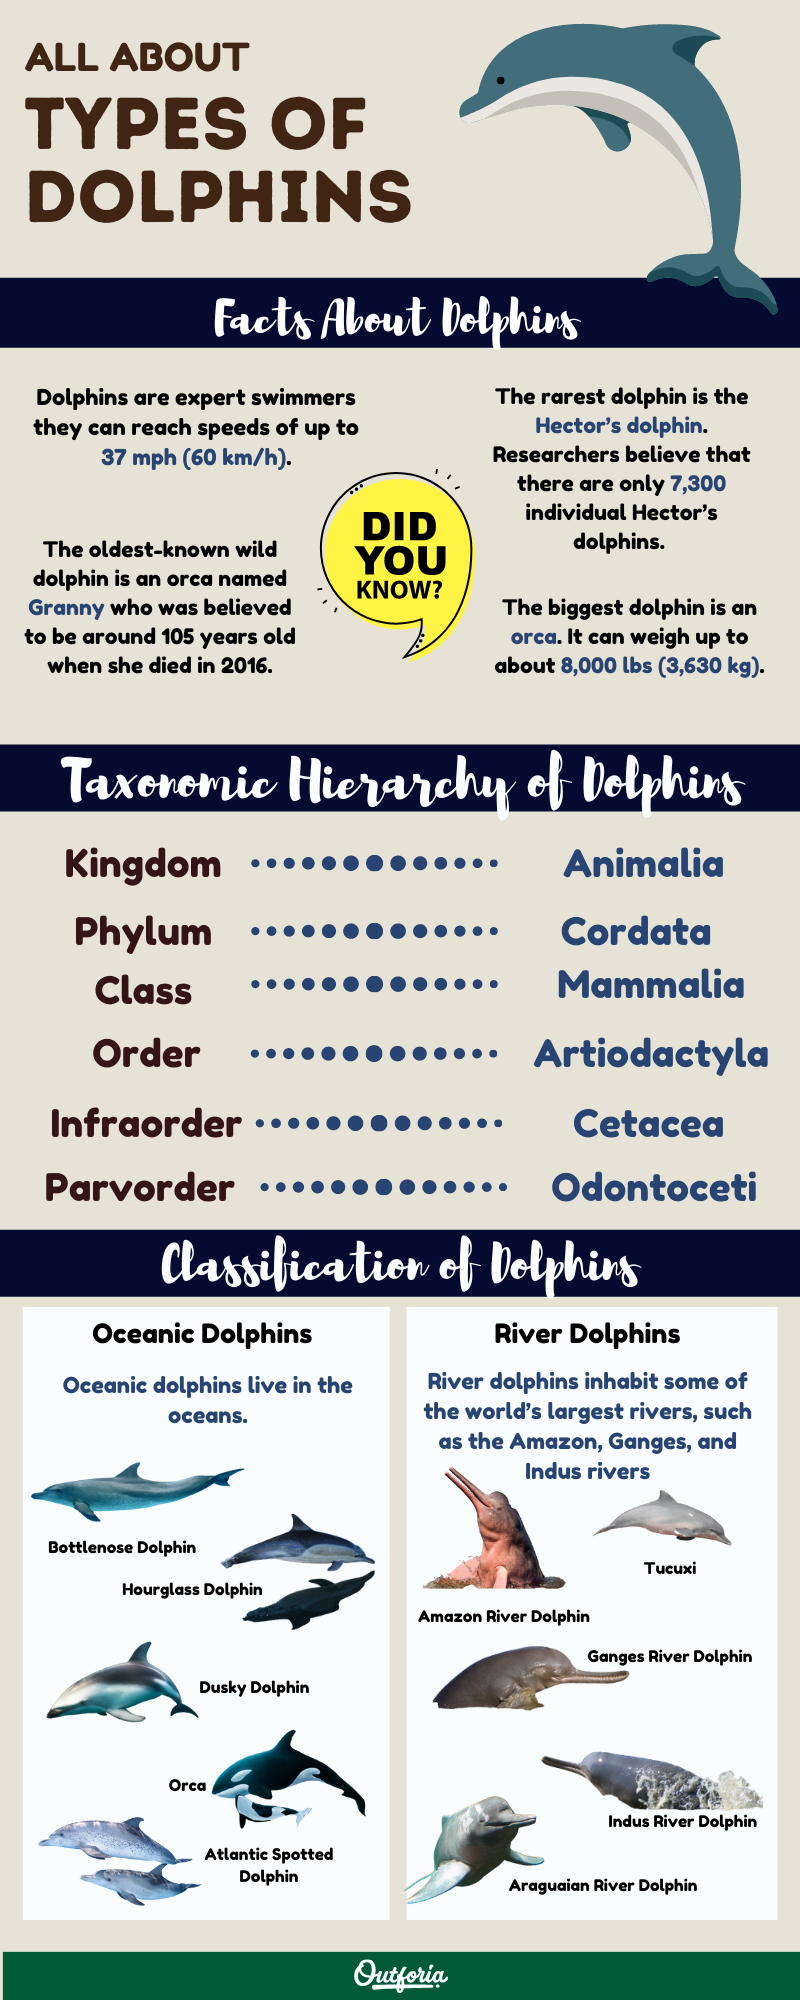 Types of dolphins infographic